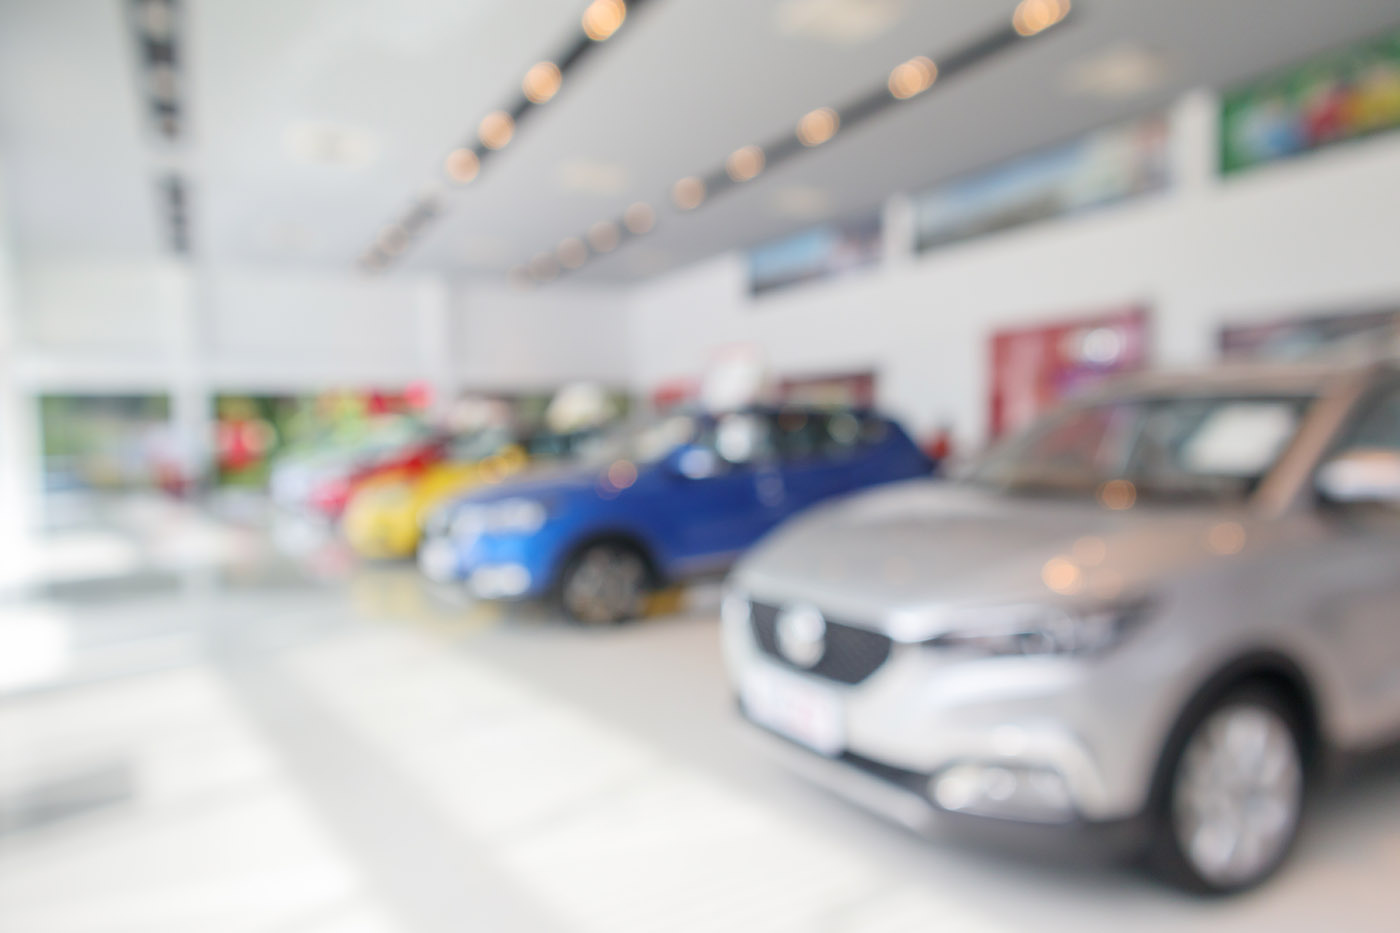 Blurred image of cars